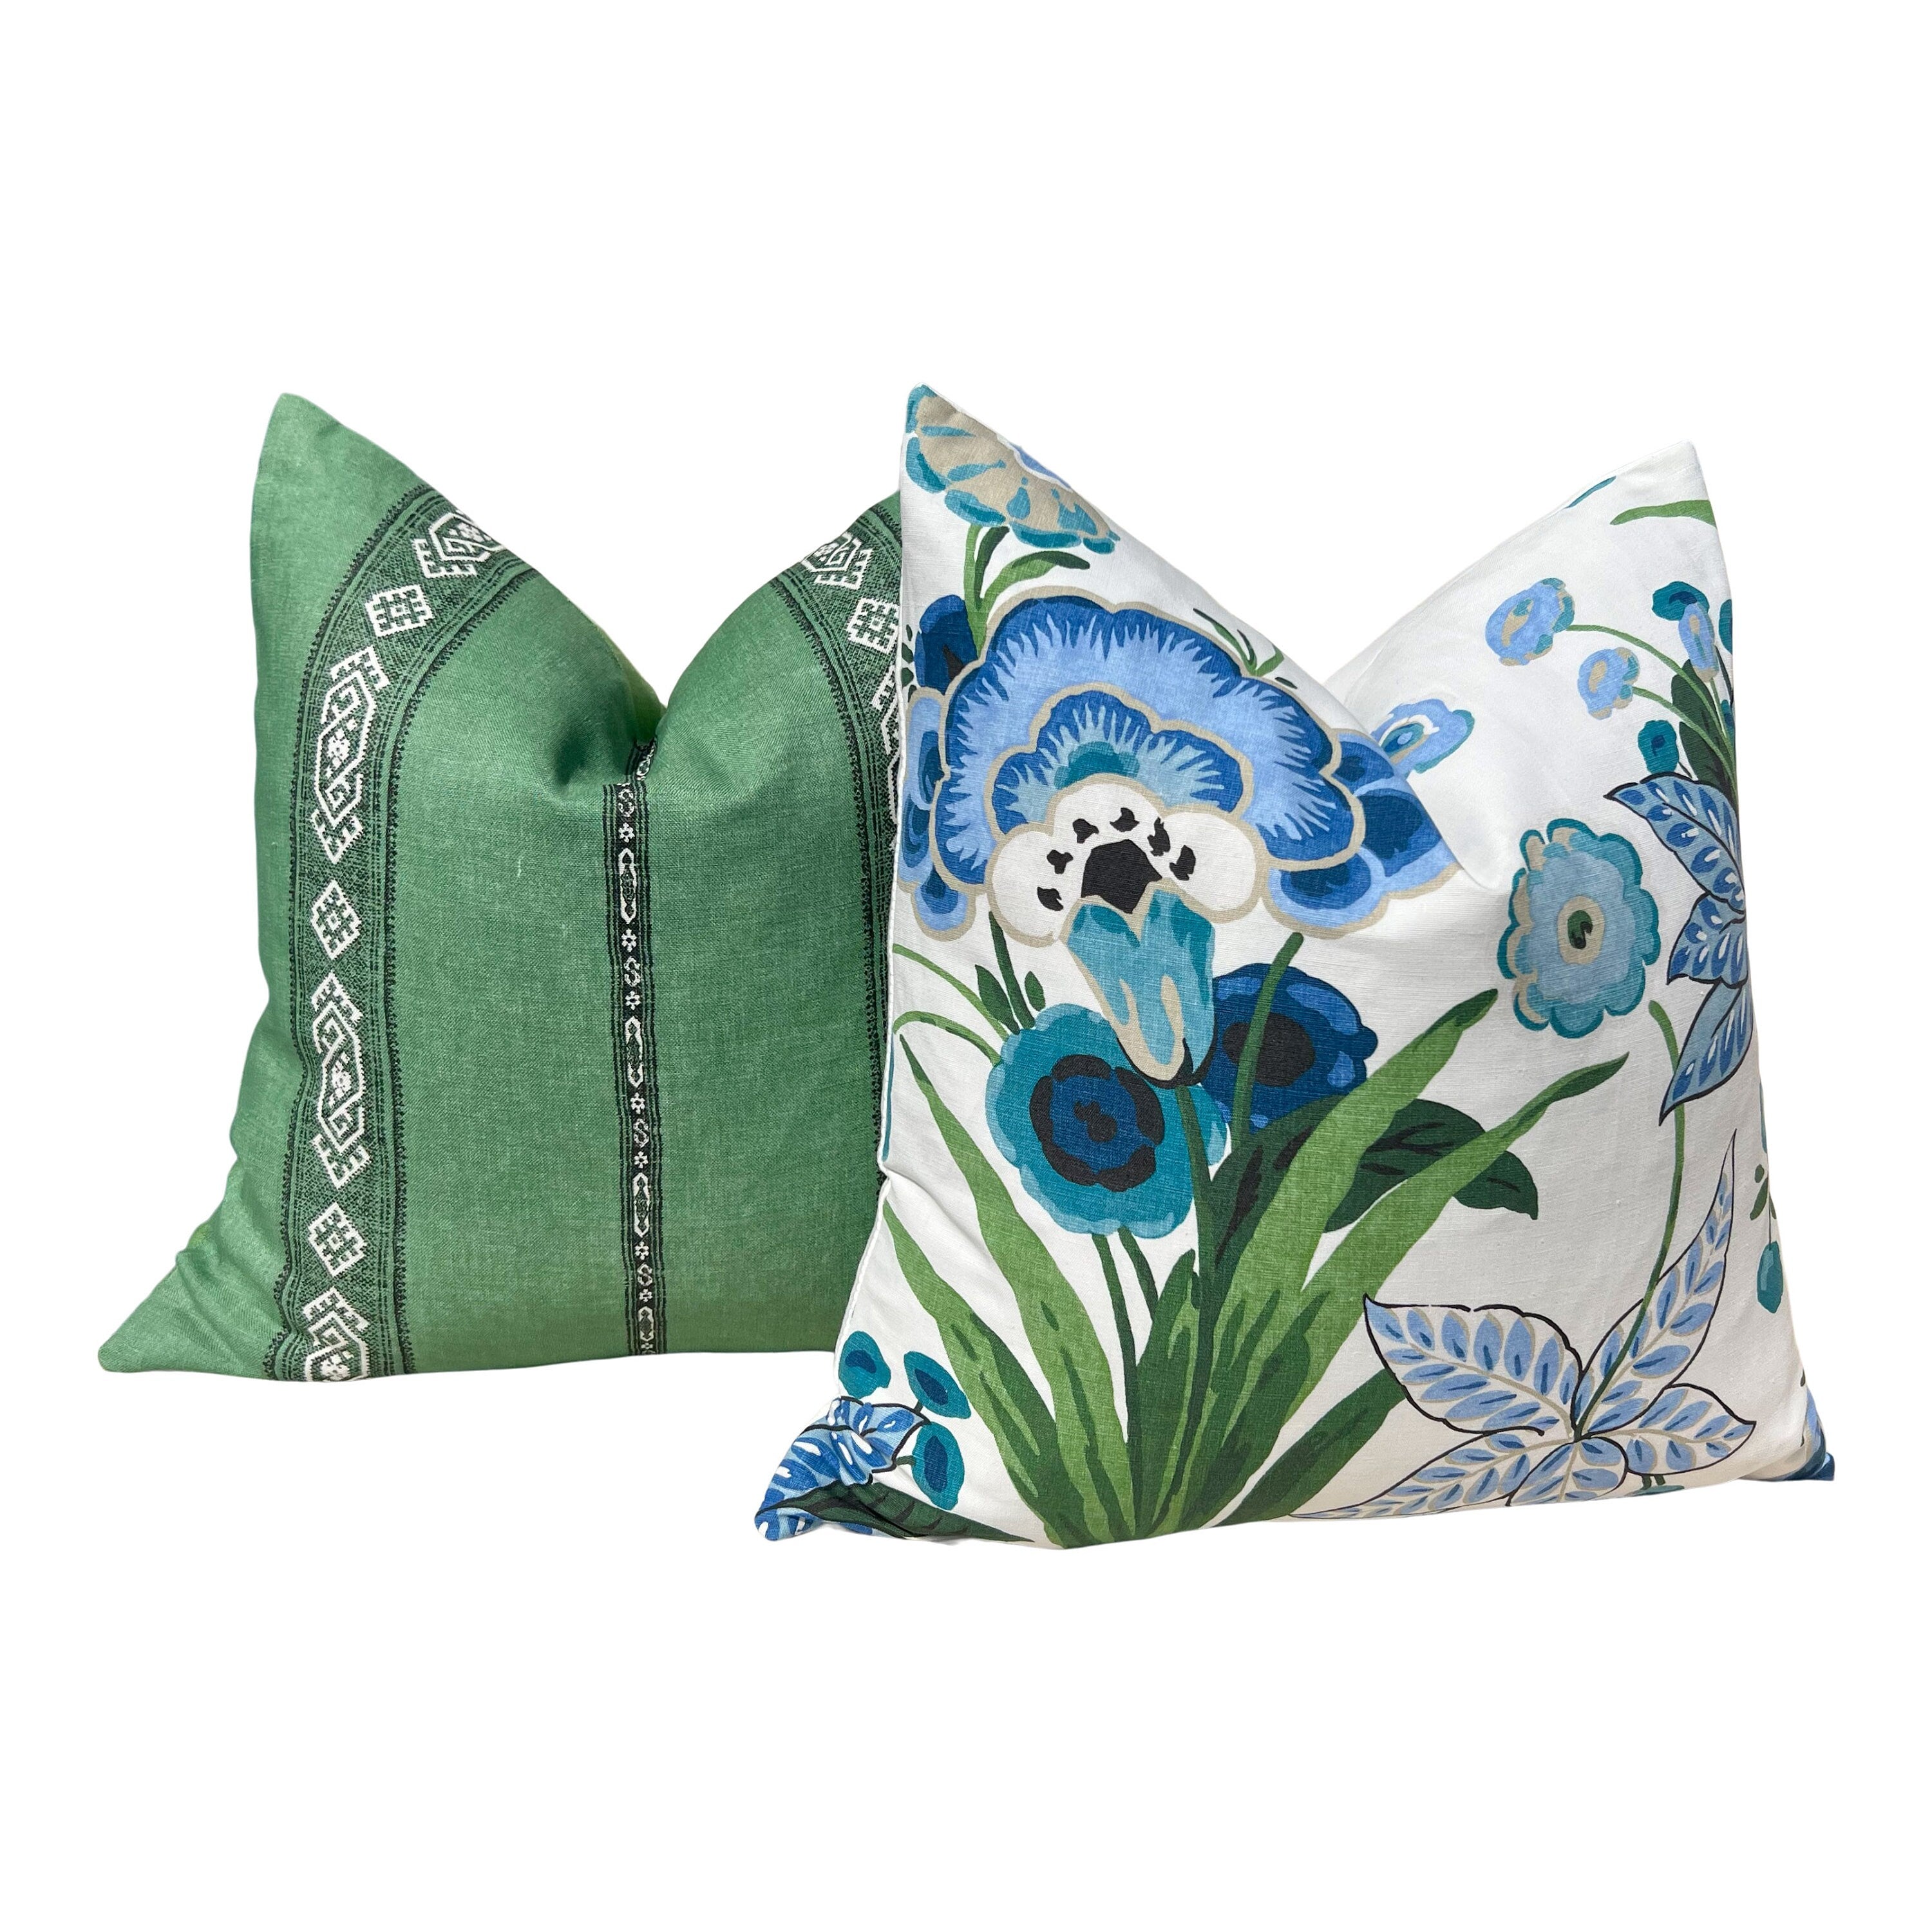 Floral Pasadena Pillow in Blue and Green. Decorative Accent Cushion Cover, Euro Sham Floral for Bed Sofa, Lumbar Pillow, Designer Pillows